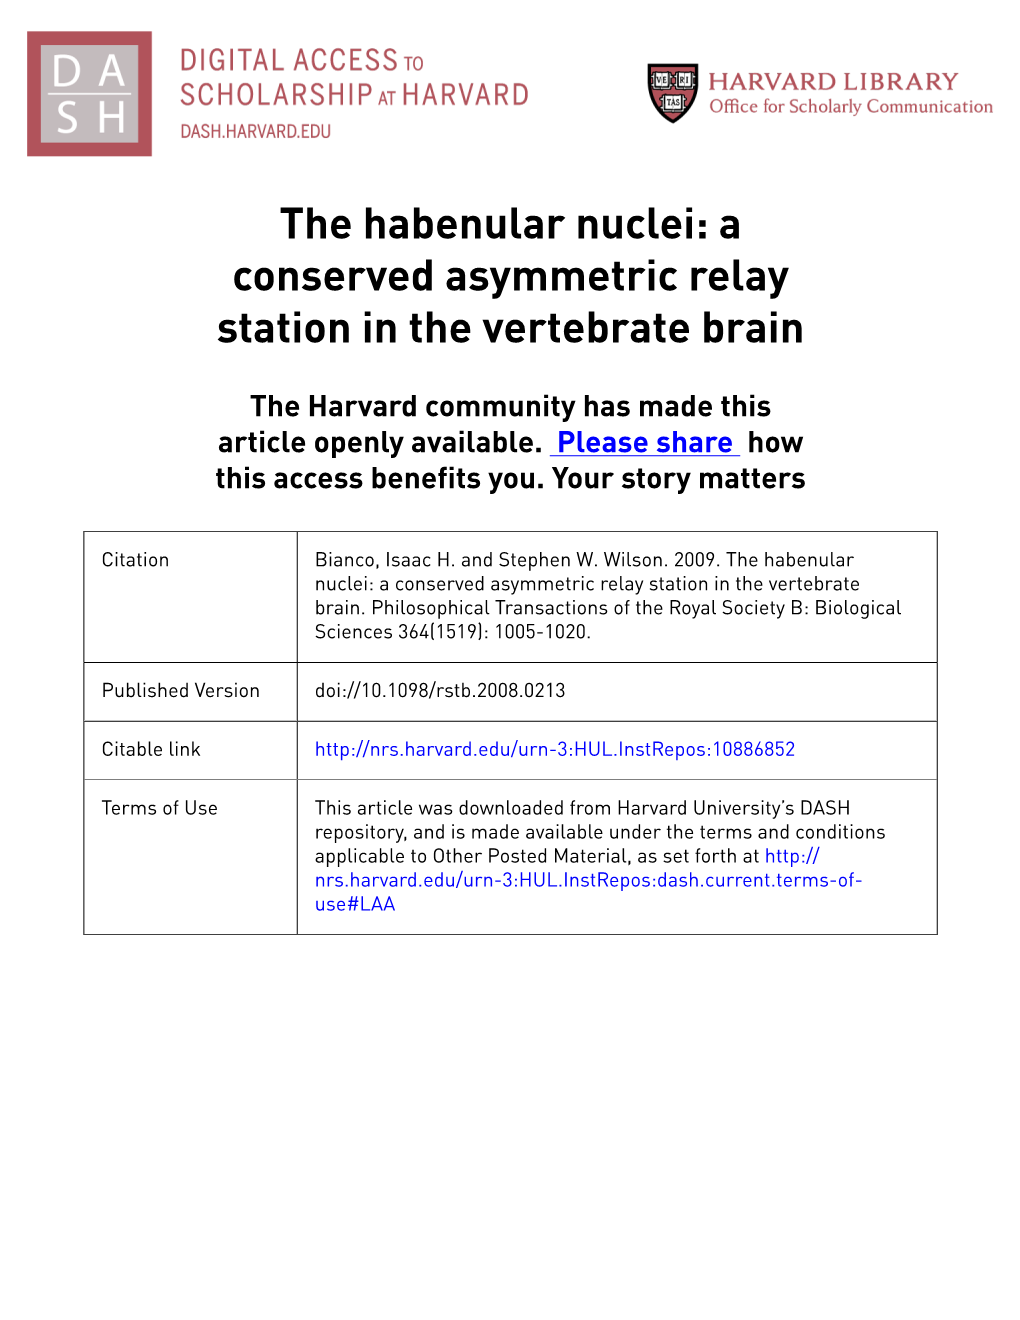 The Habenular Nuclei: a Conserved Asymmetric Relay Station in the Vertebrate Brain